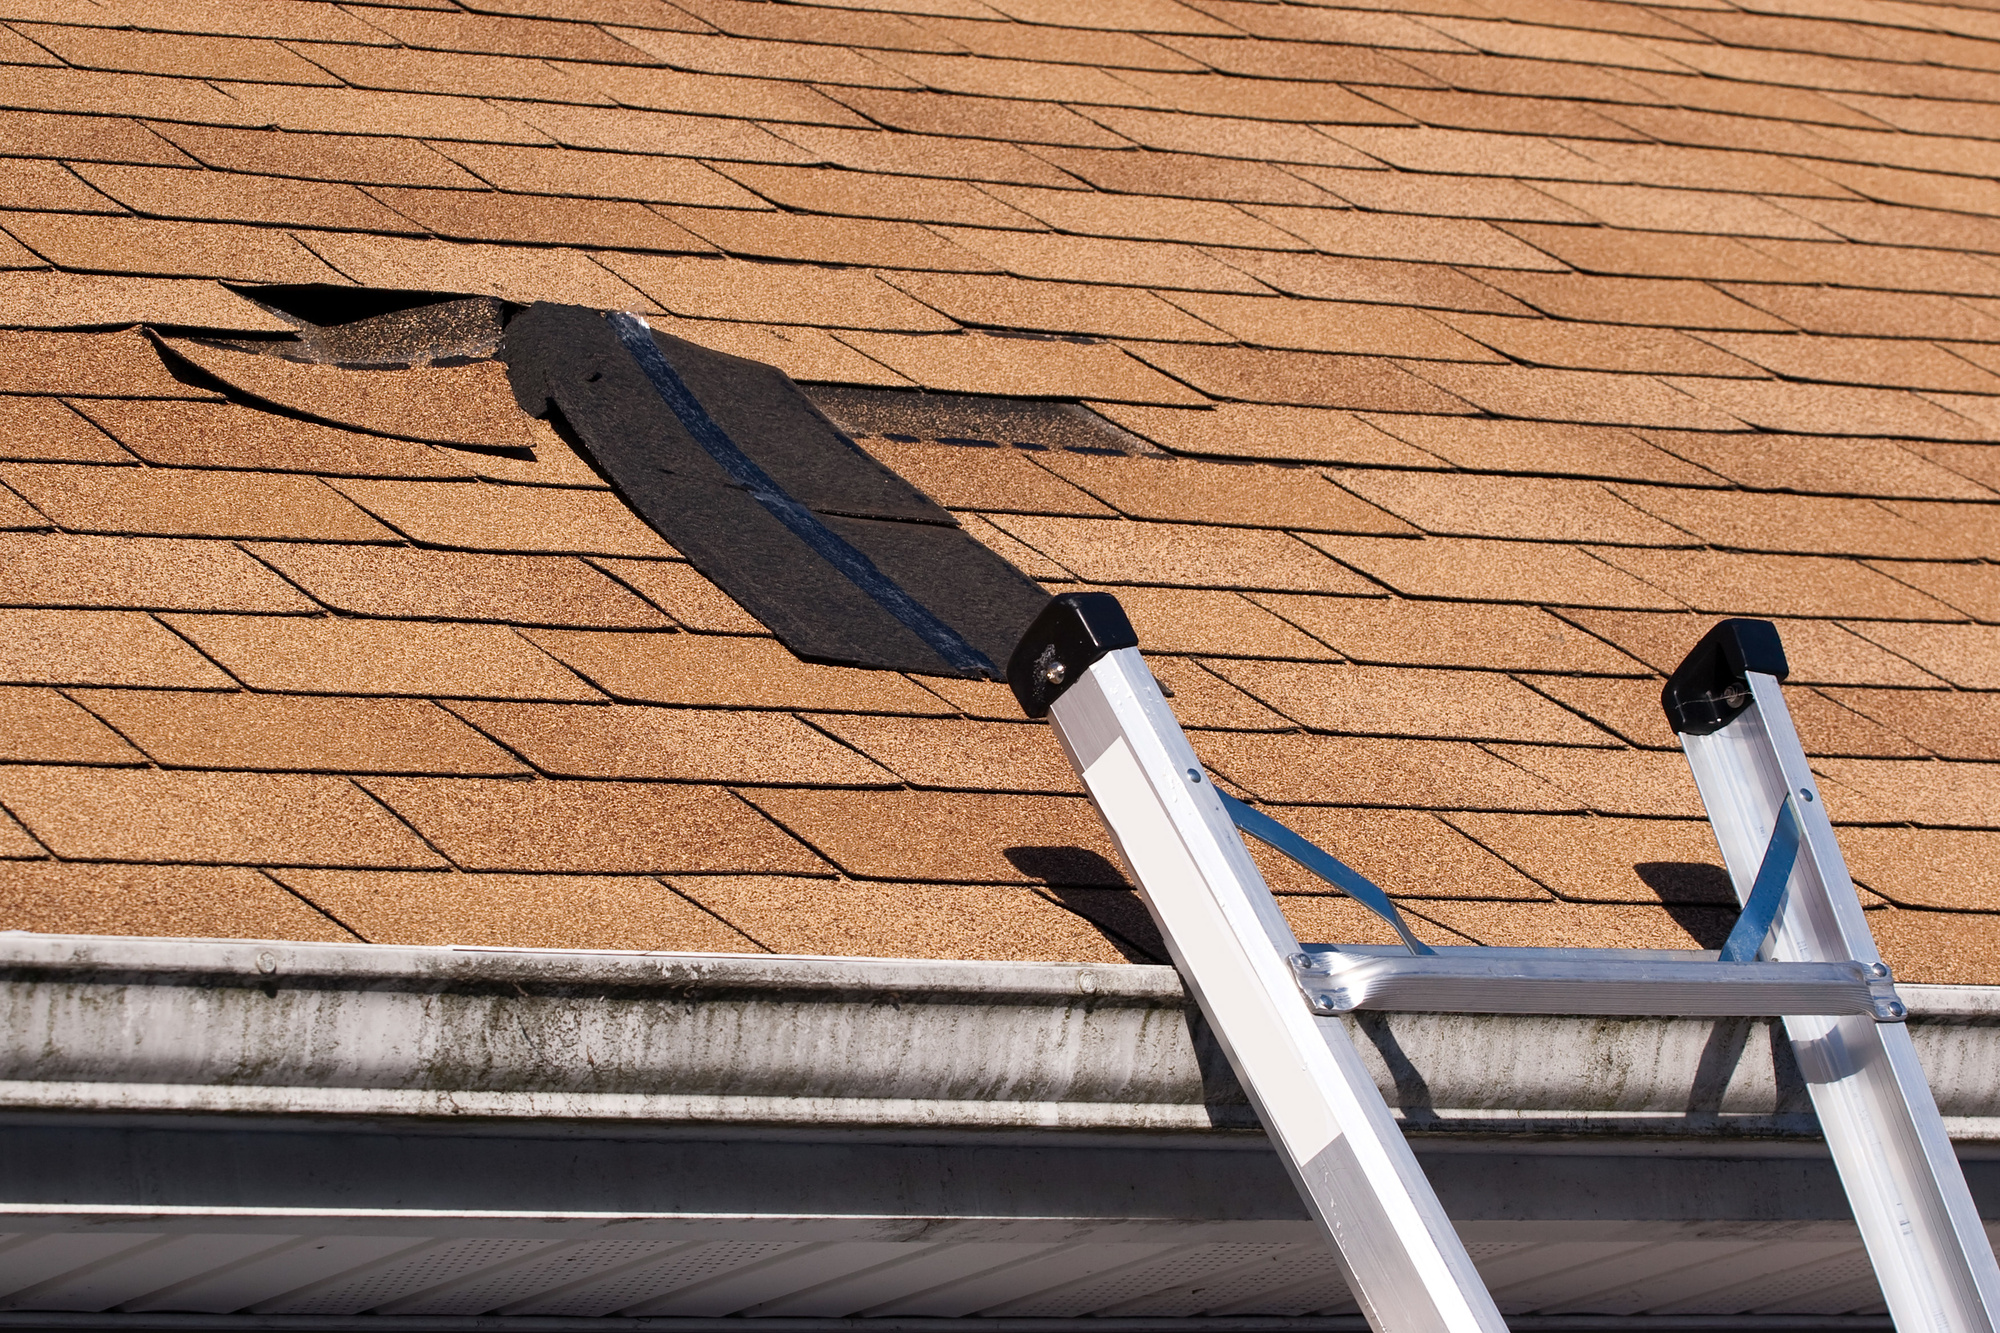 There are several different types of roofing that you have to choose from for your home, but how long does a roof last? This is the lifespan you can expect.